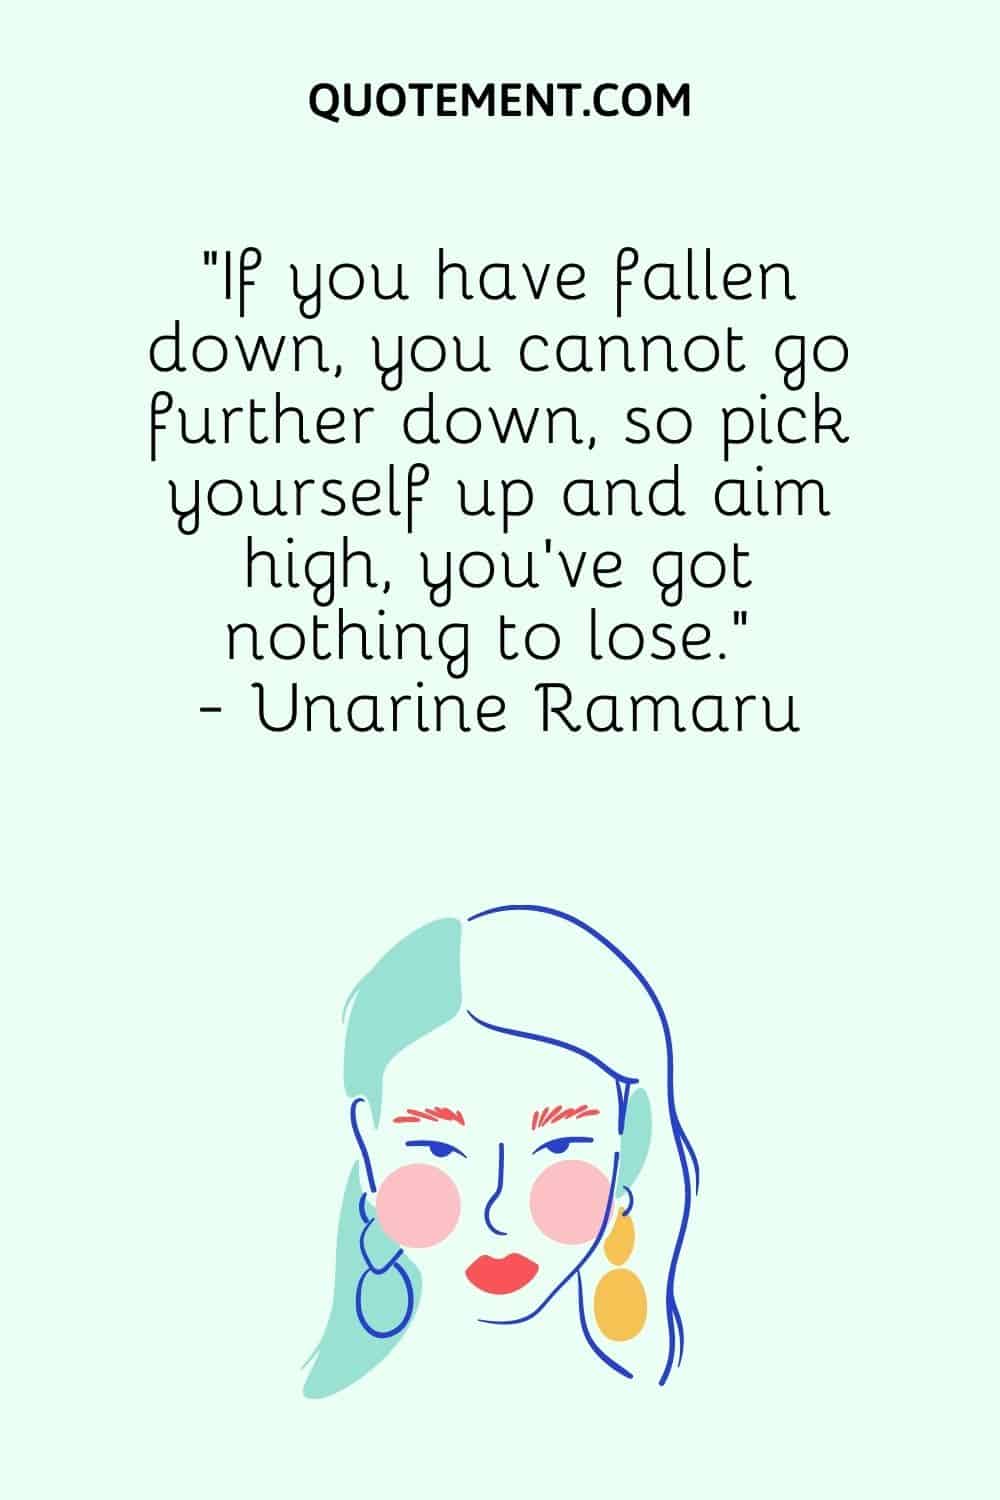 “If you have fallen down, you cannot go further down, so pick yourself up and aim high, you've got nothing to lose.” - Unarine Ramaru